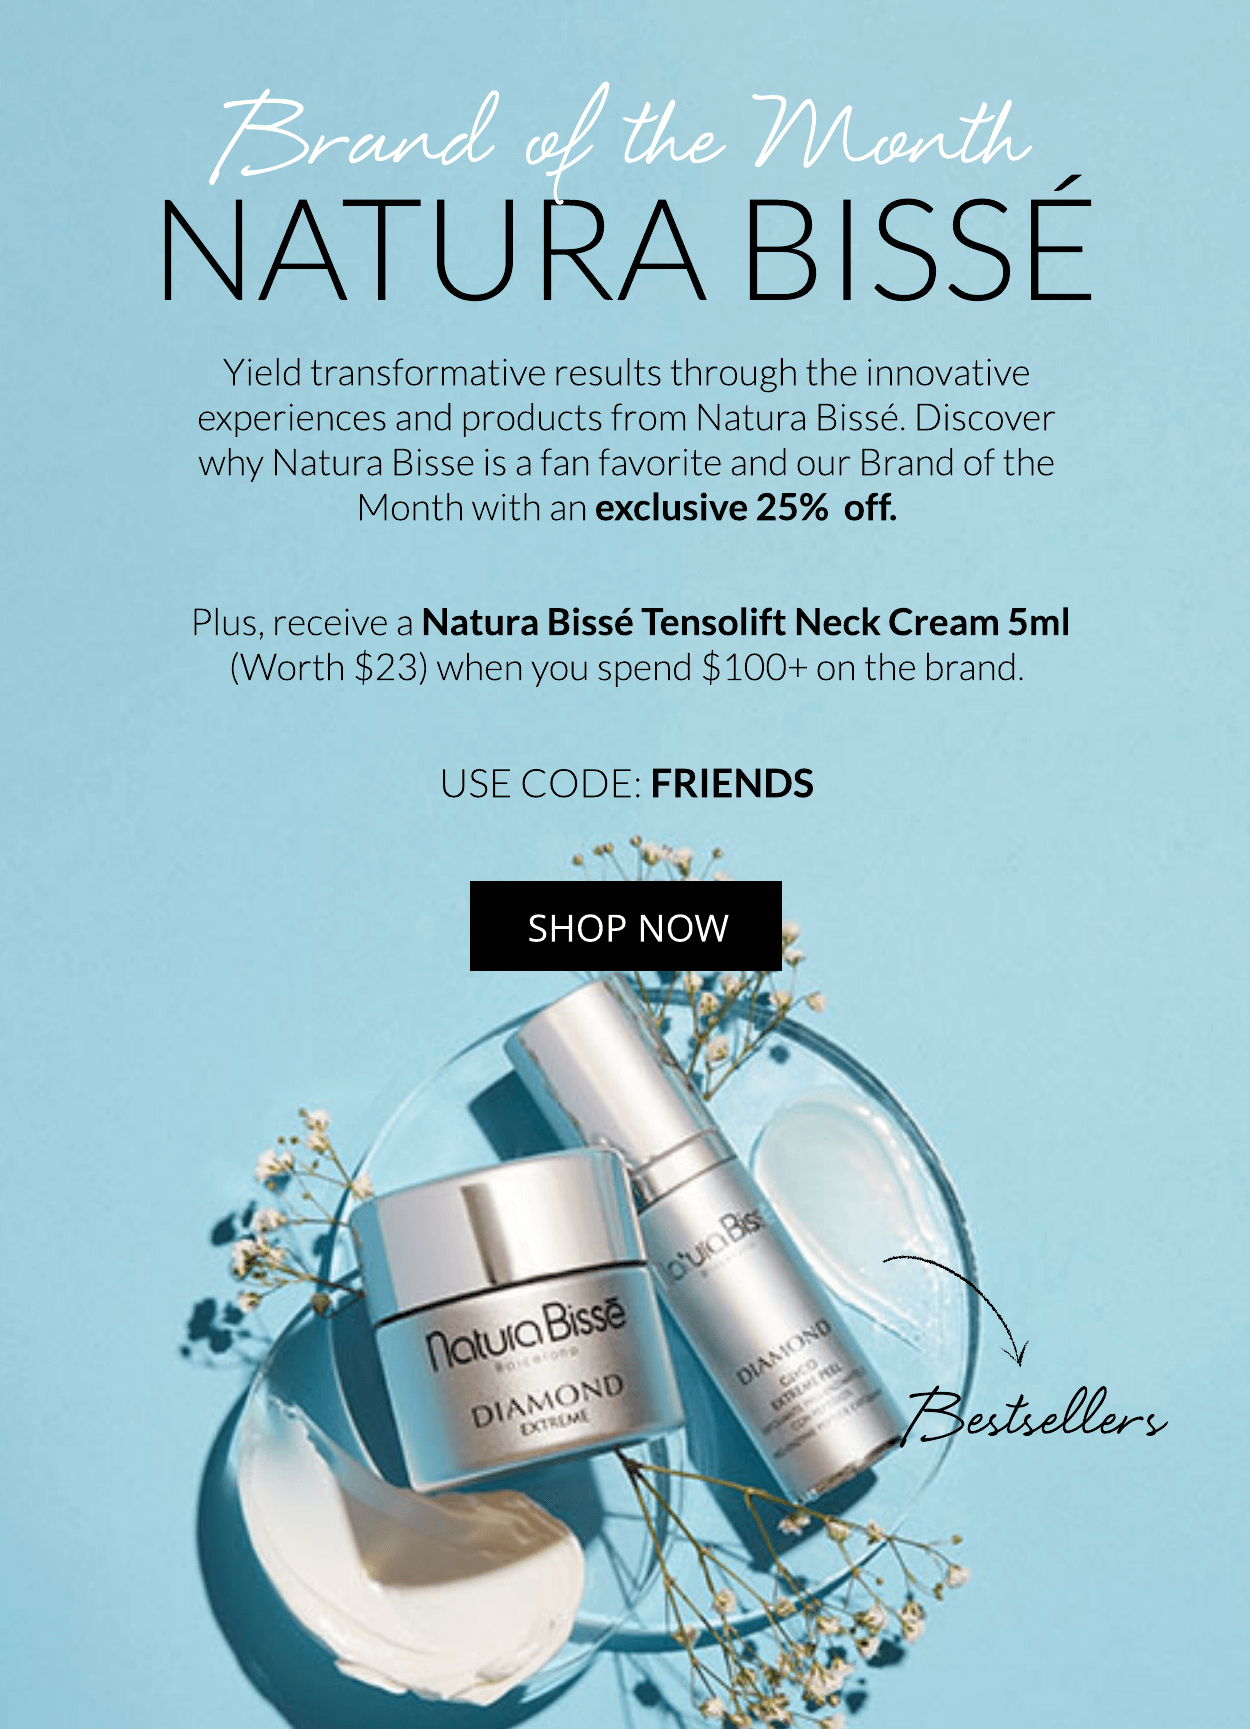 25% Off Natura Bissé & $23 Gift - Our Brand of the Month! - SkinStore Email  Archive